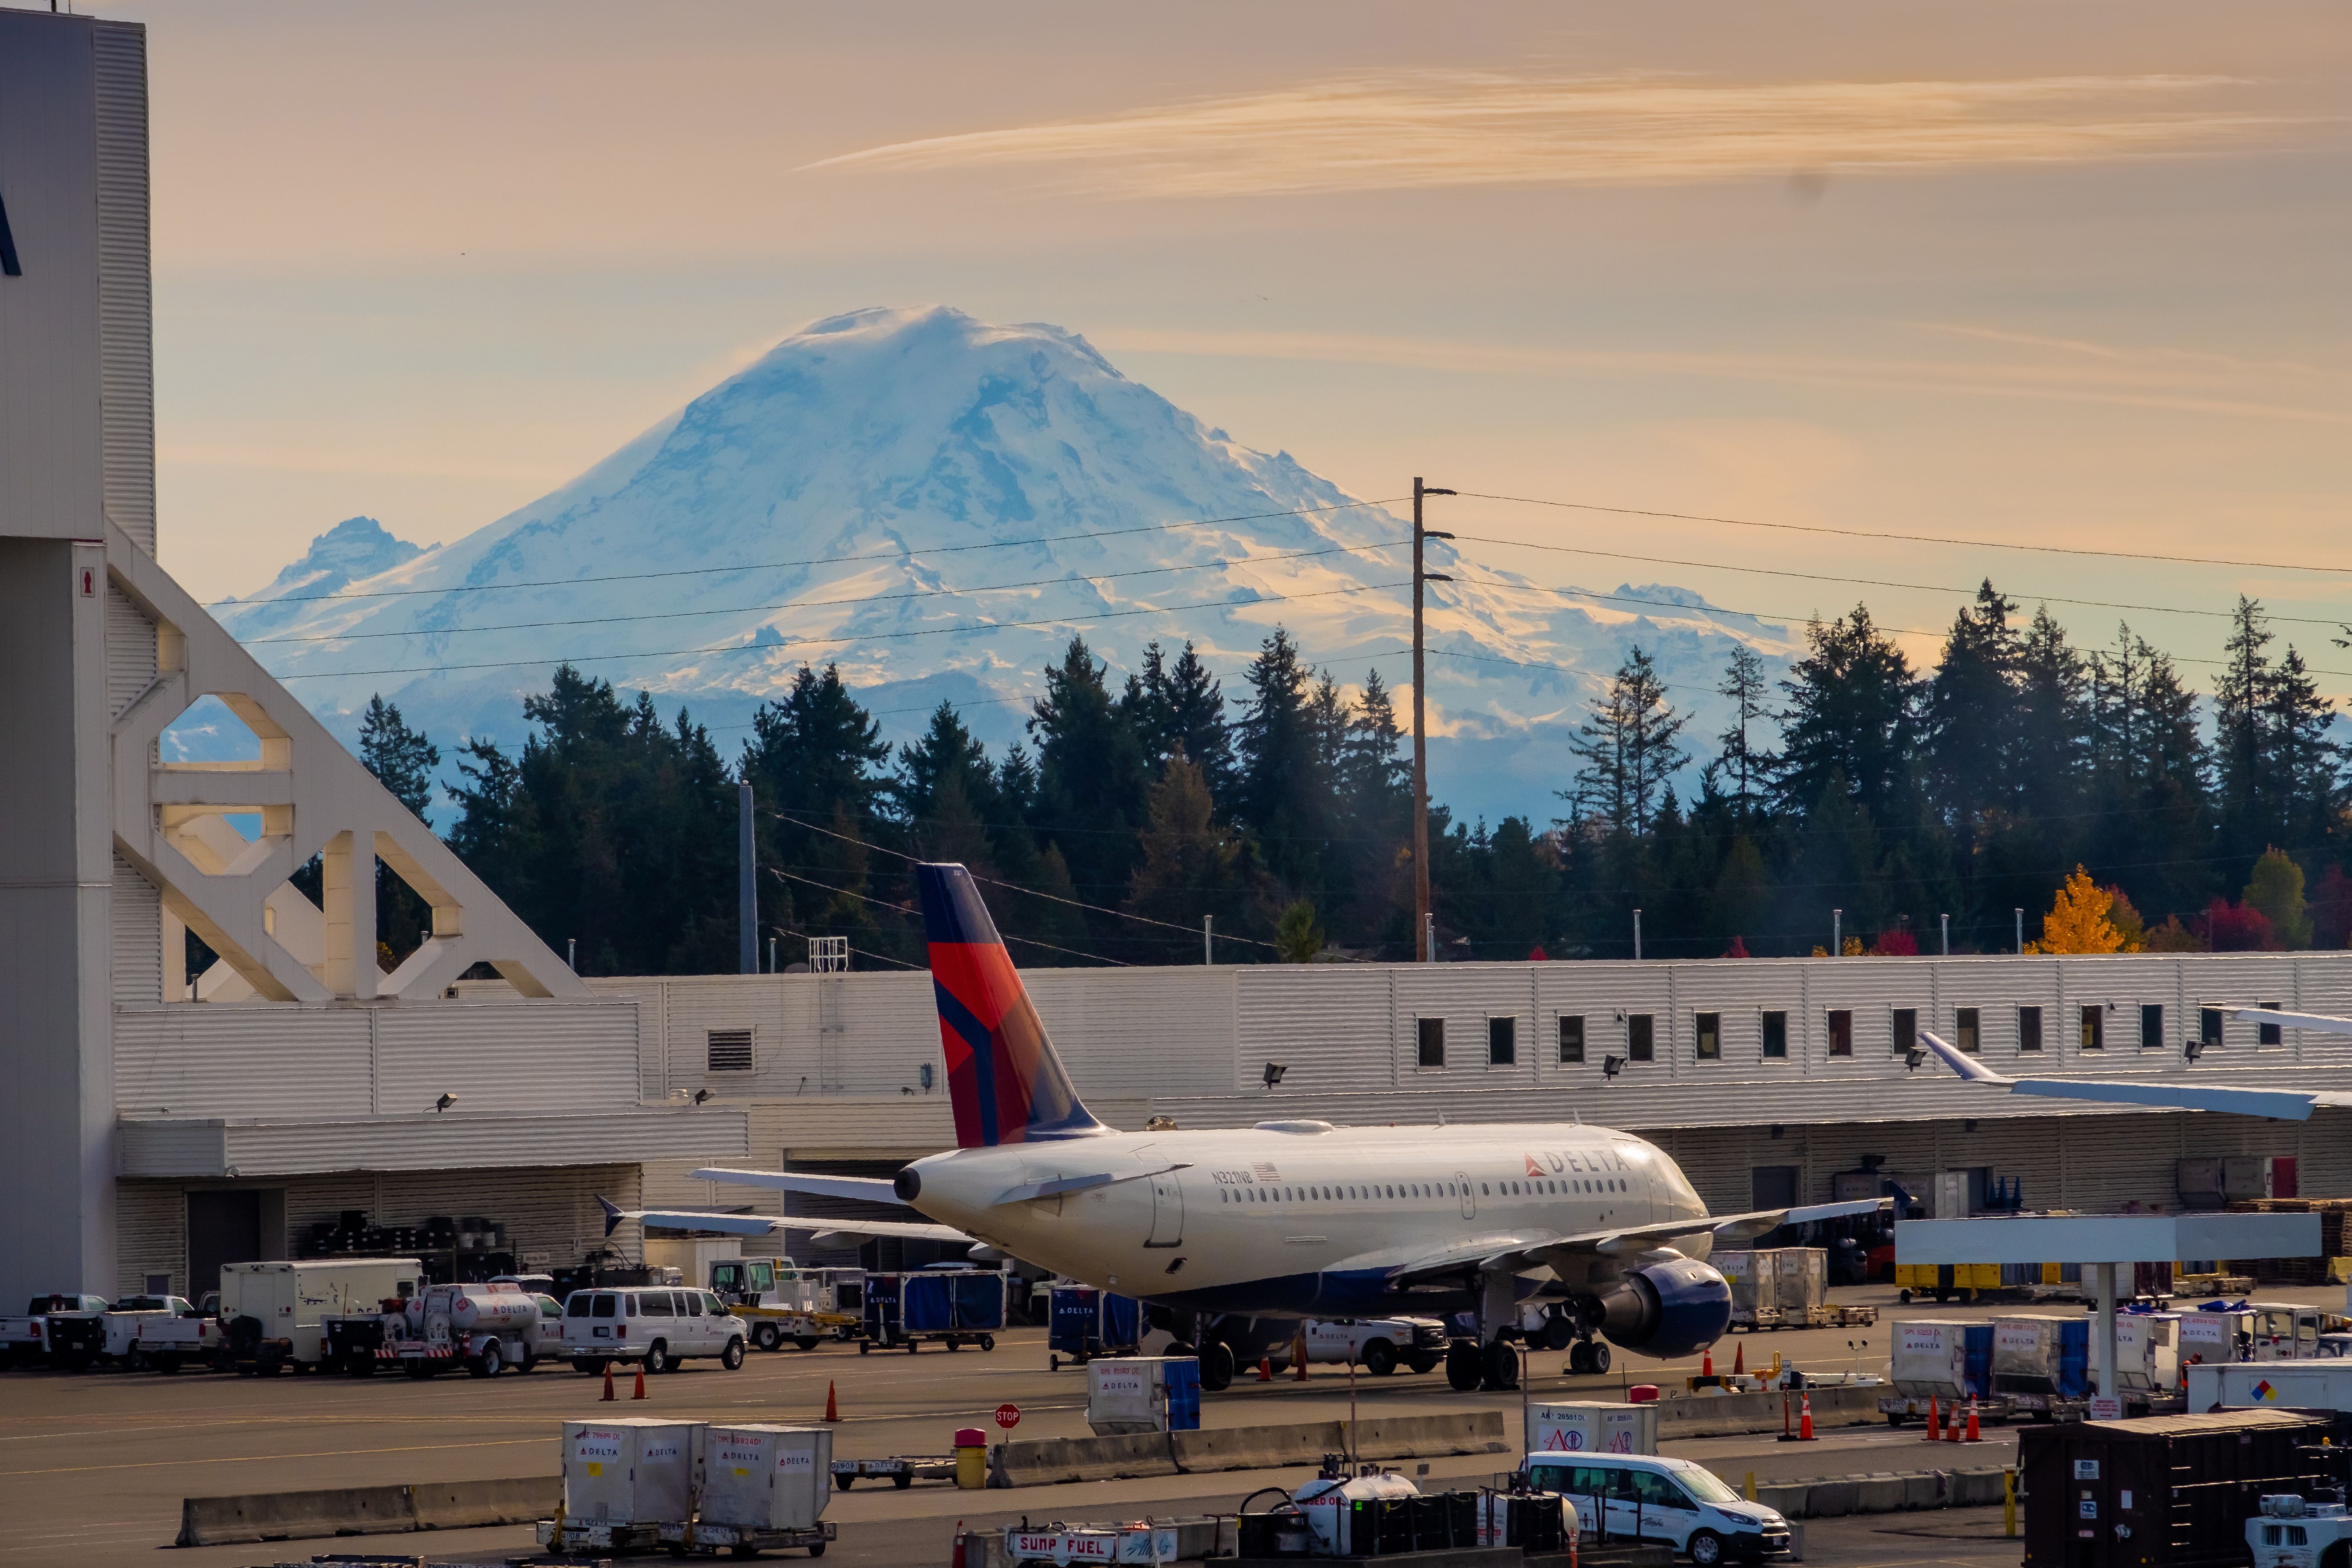 Seattle-Tacoma International Airport Runway Area with Delta aircraft